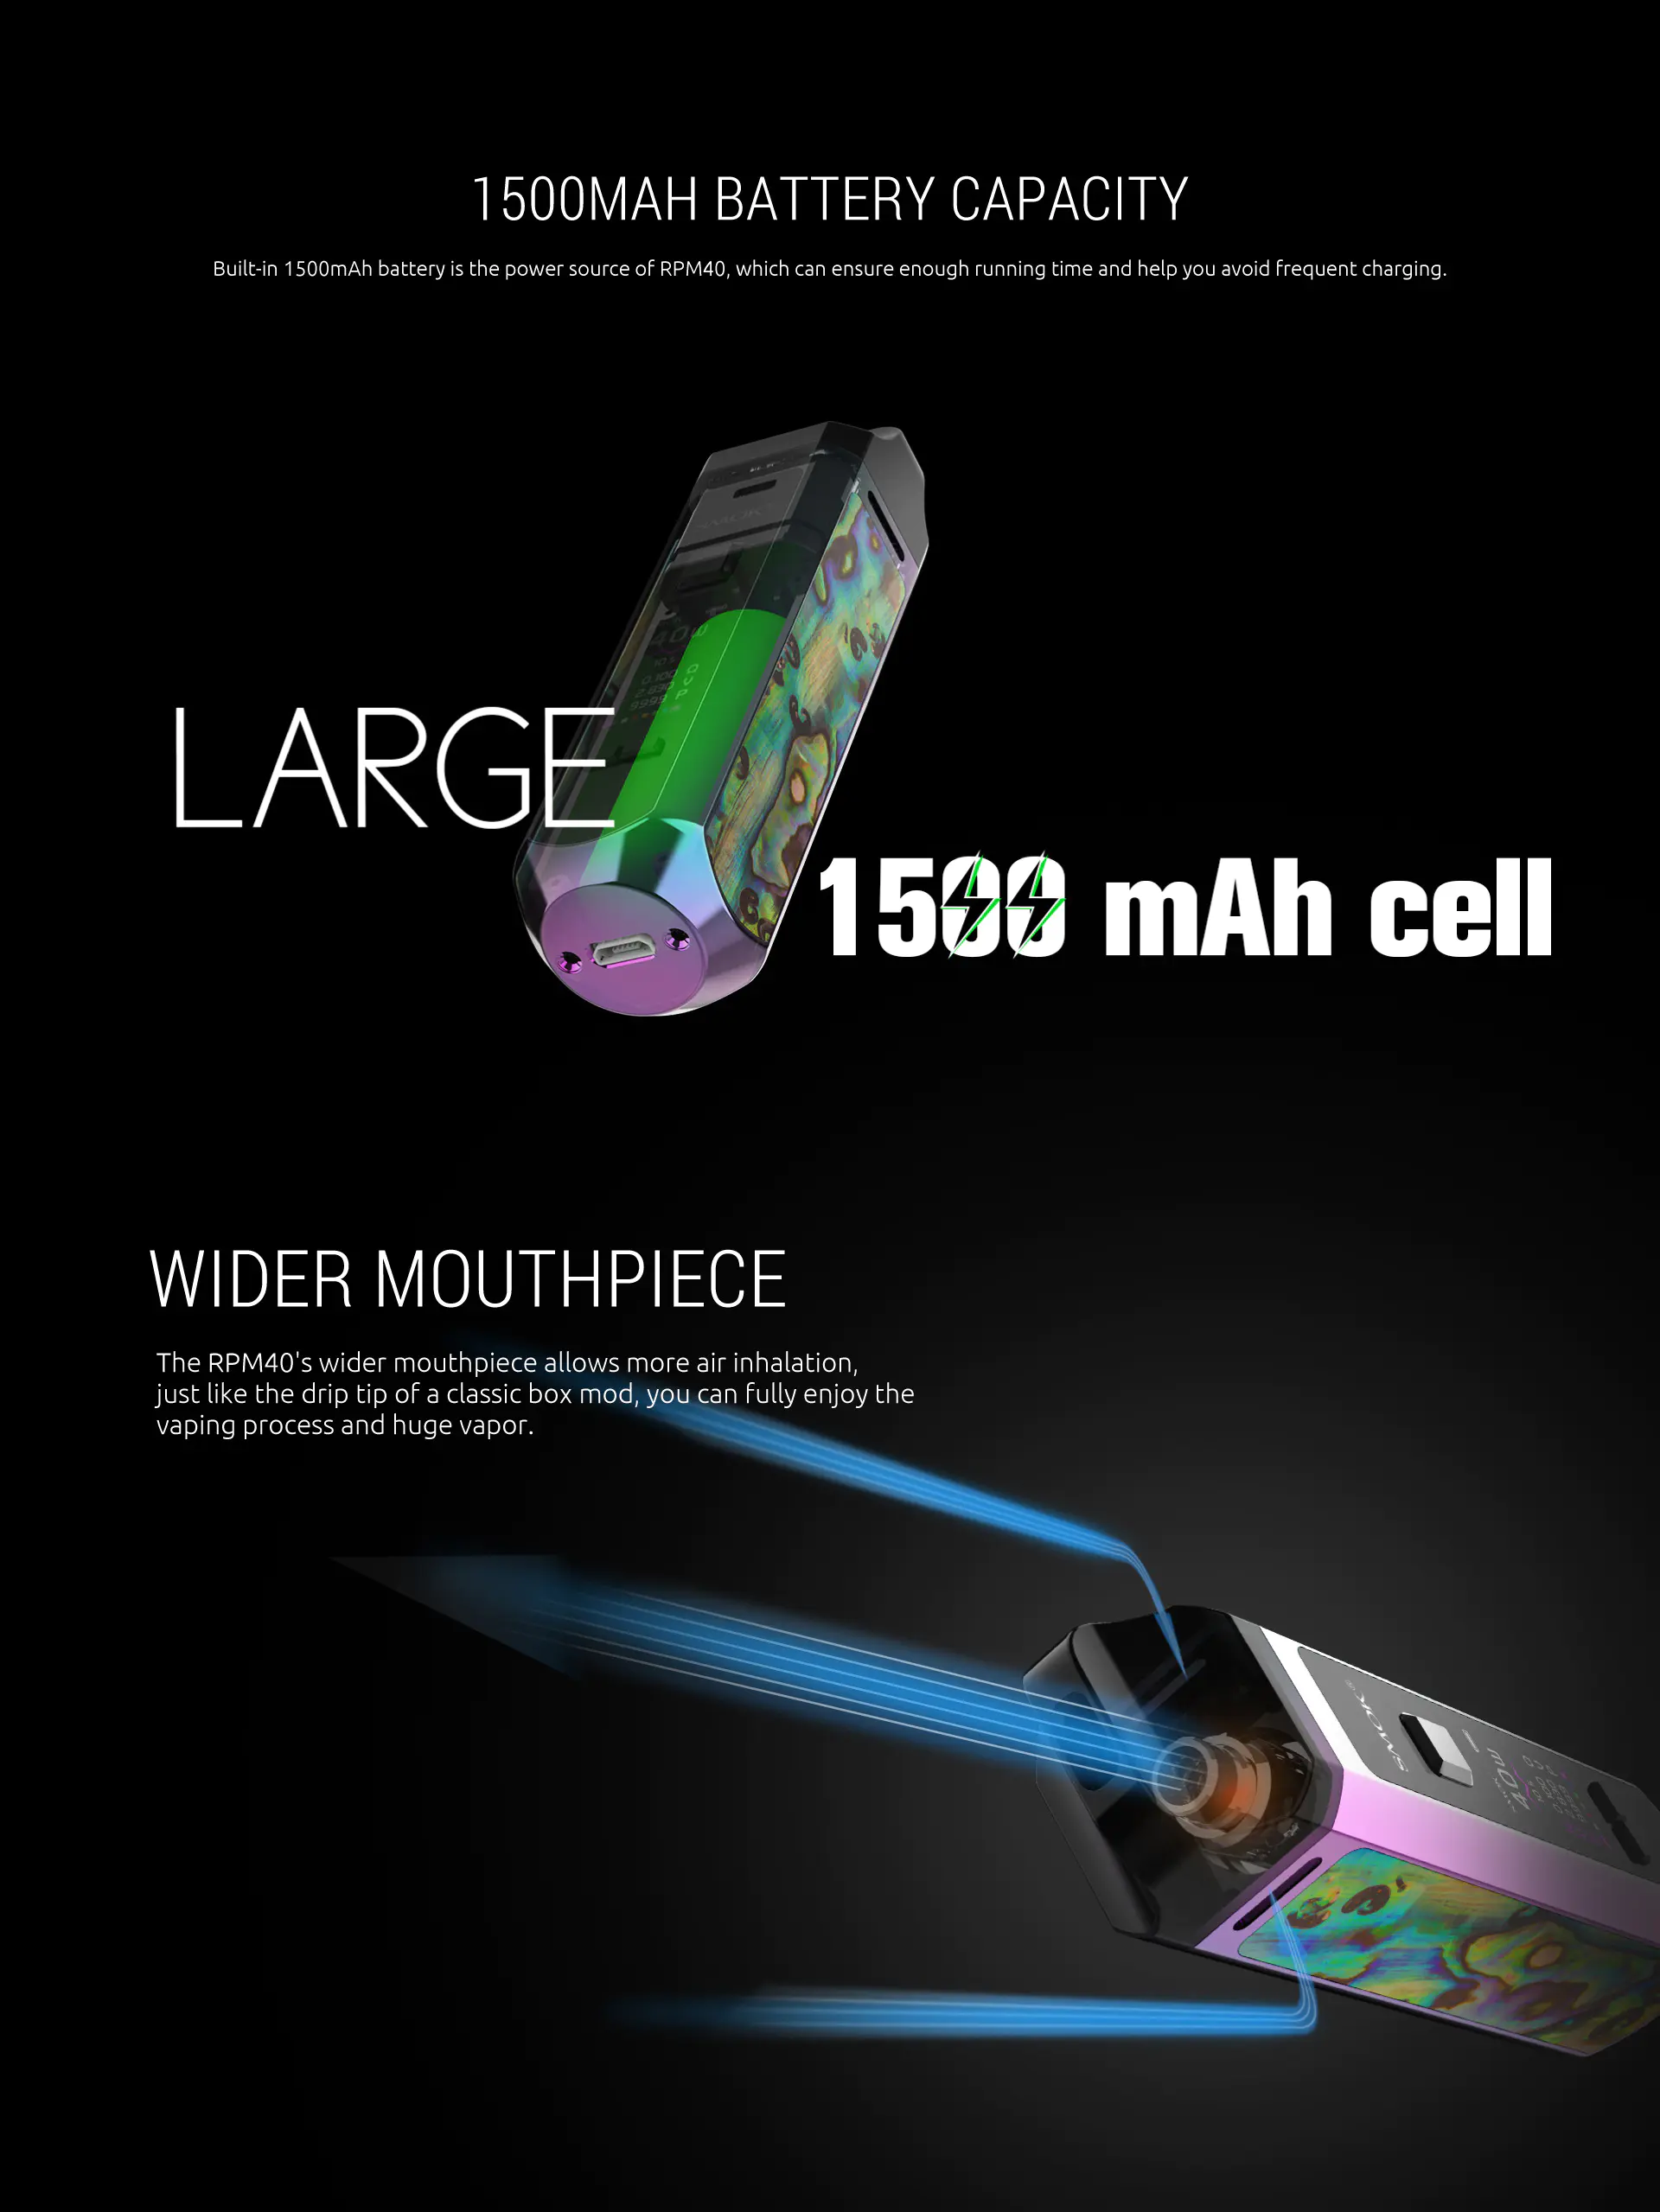 SMOK RPM40 Has a Large Battery Capacity and Wider Mouthpiece